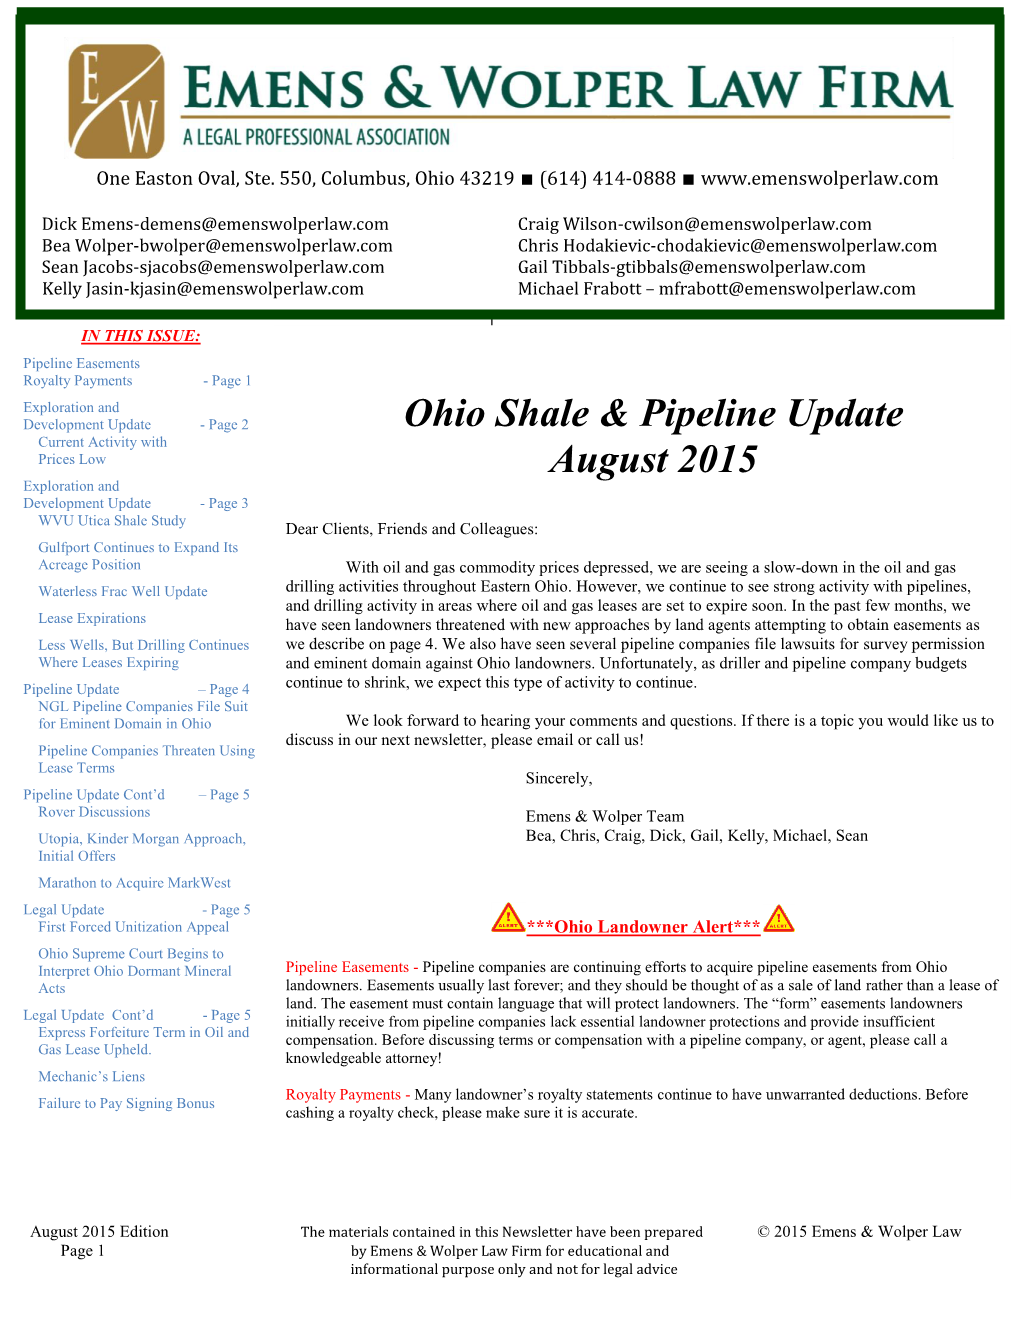 Ohio Shale & Pipeline Update August 2015